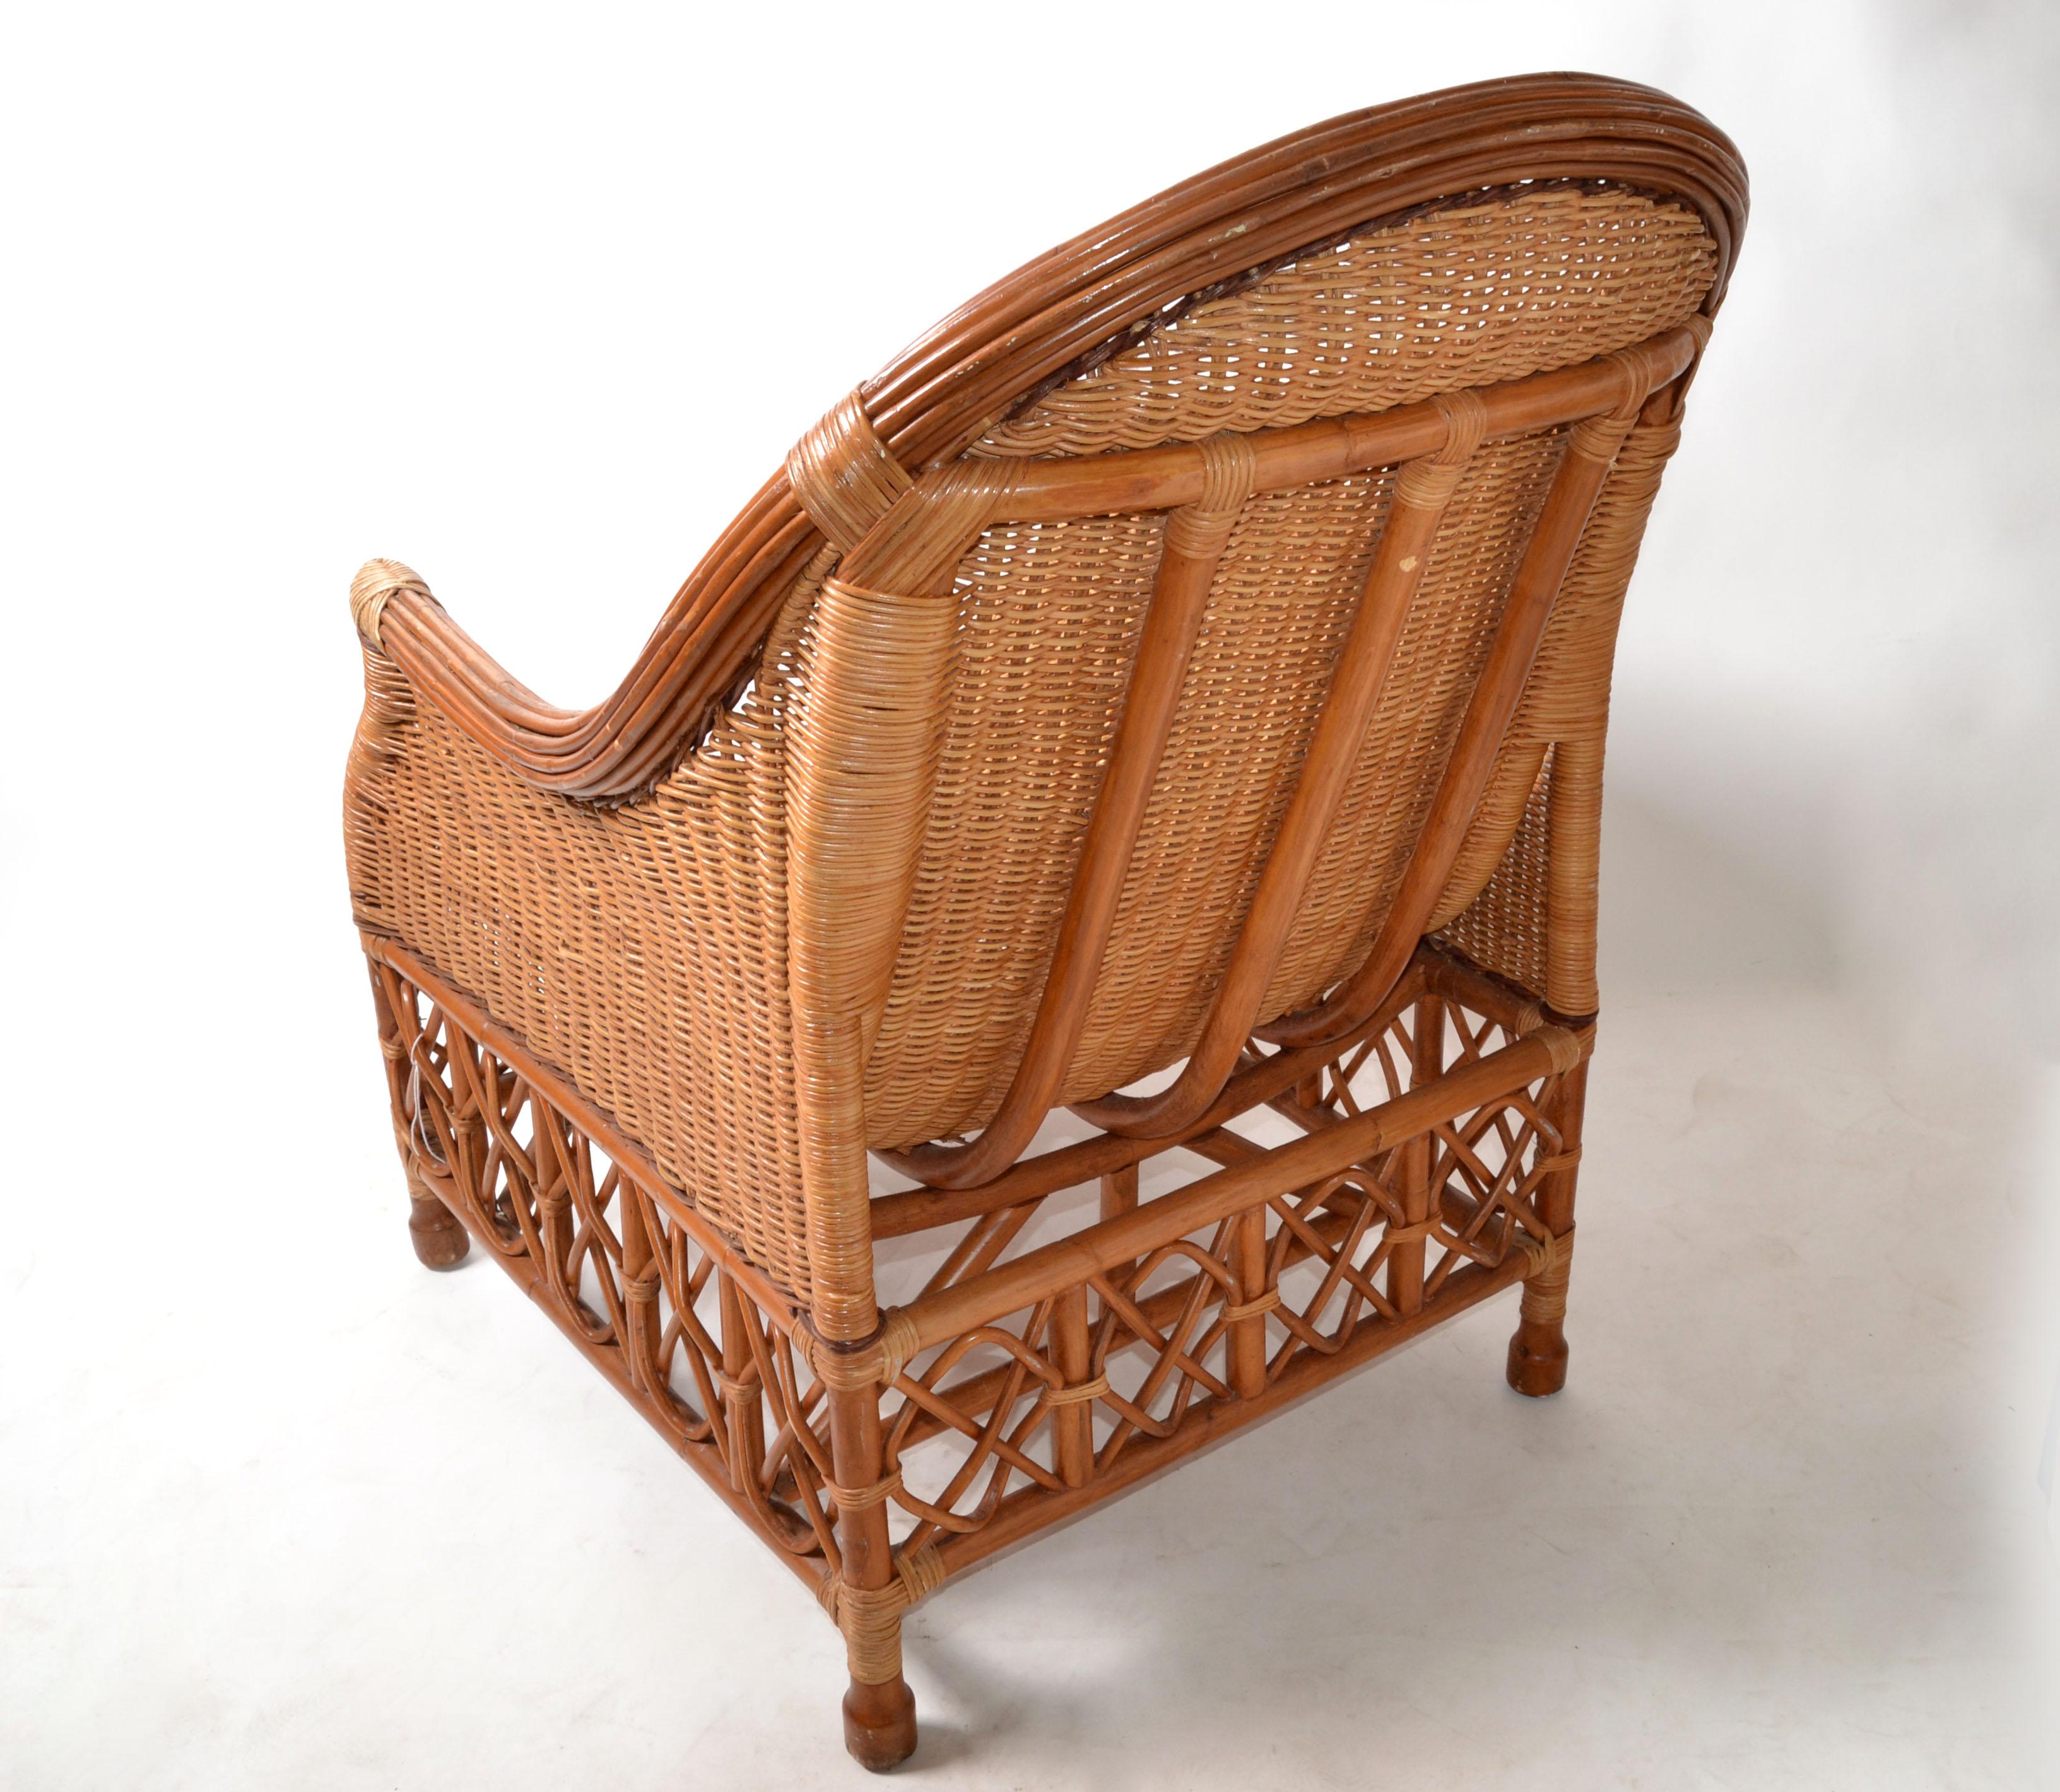 Bamboo, Cane & Wicker Lounge Chair Handwoven Bohemian 1960 Mid-Century Modern For Sale 6